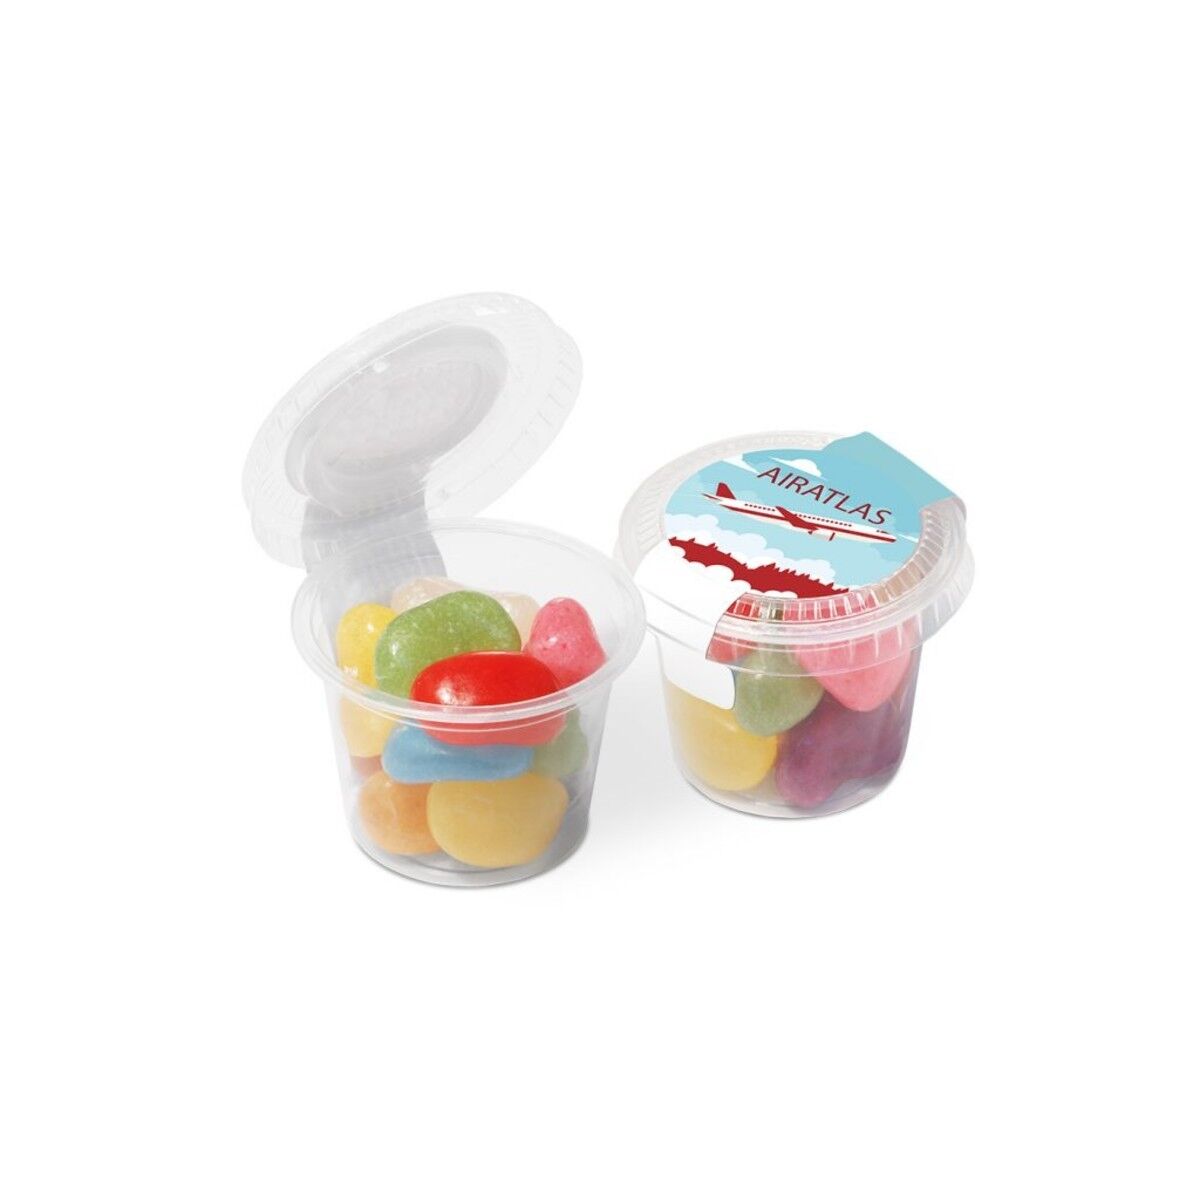 Mini Confectionery Pot filled with Jolly Beans